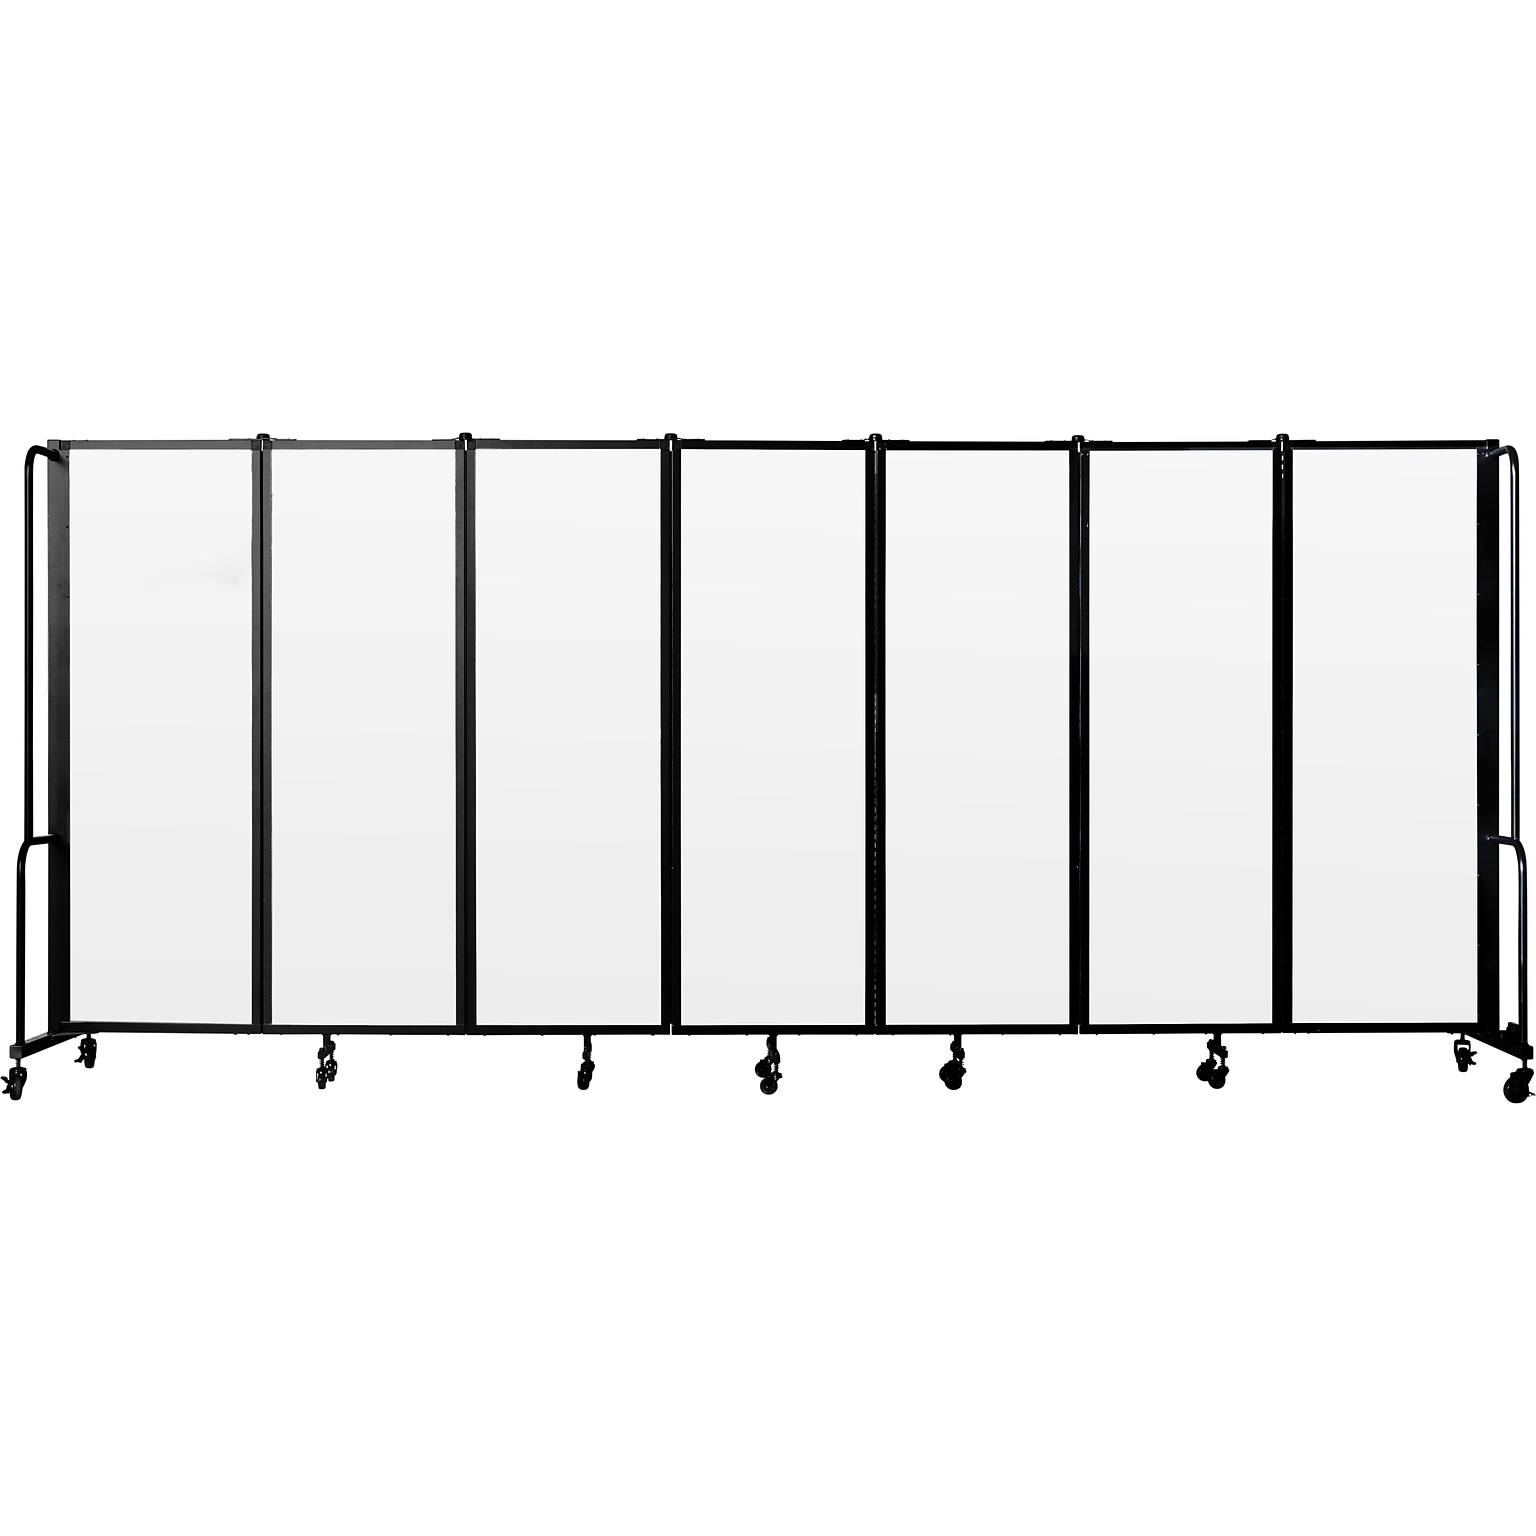 National Public Seating Robo Freestanding 7-Panel Room Divider, 72H x 164W, Clear Acrylic (RDB6-7CA)